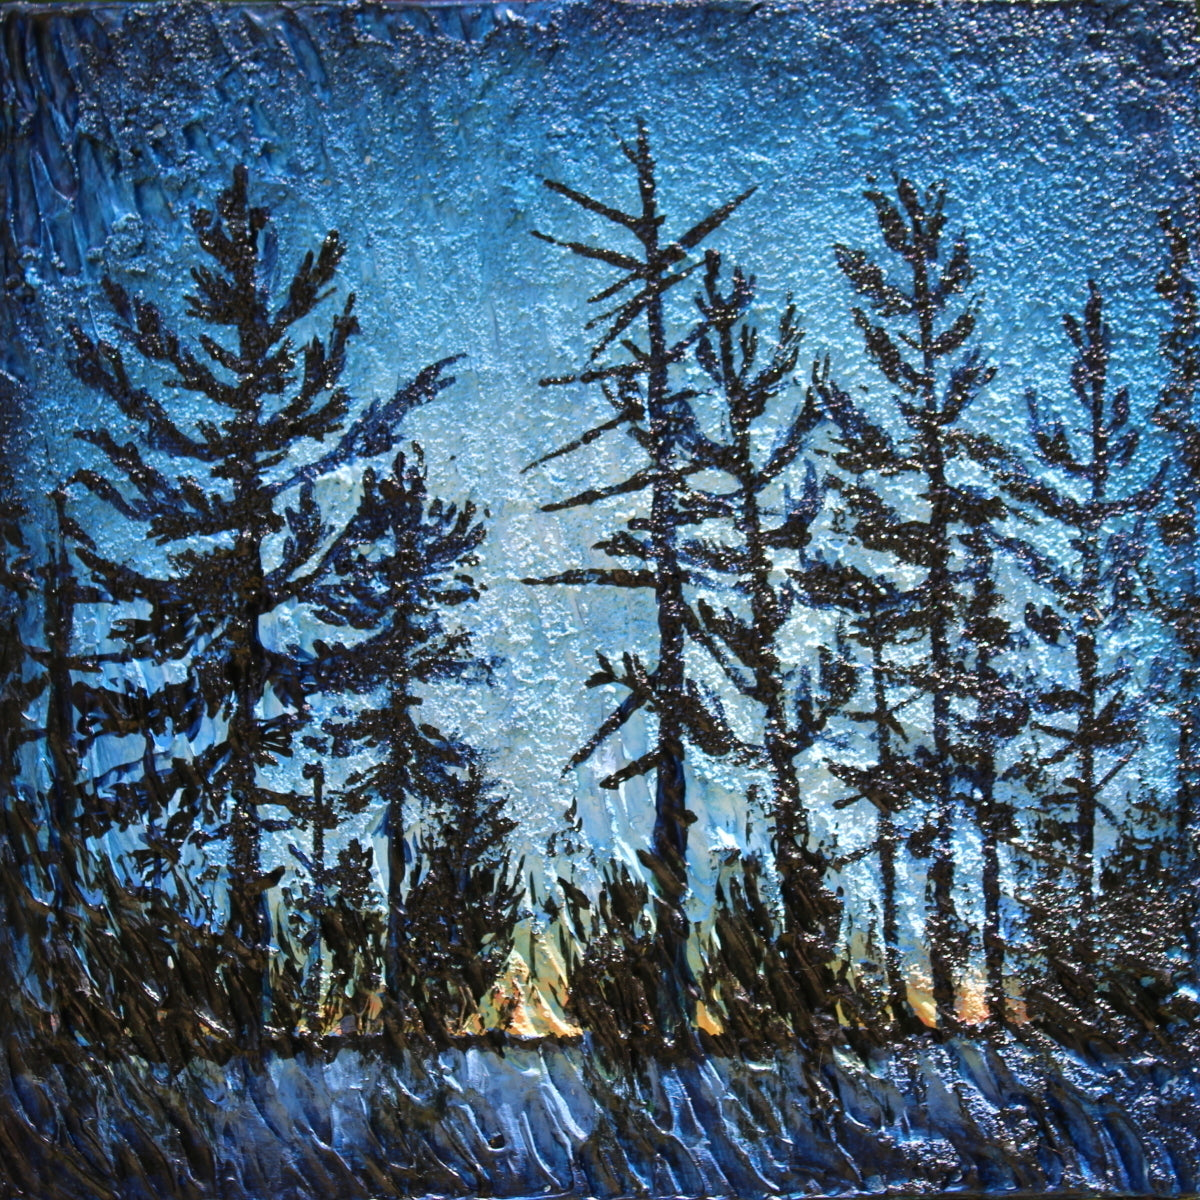 Pines in Early Eve